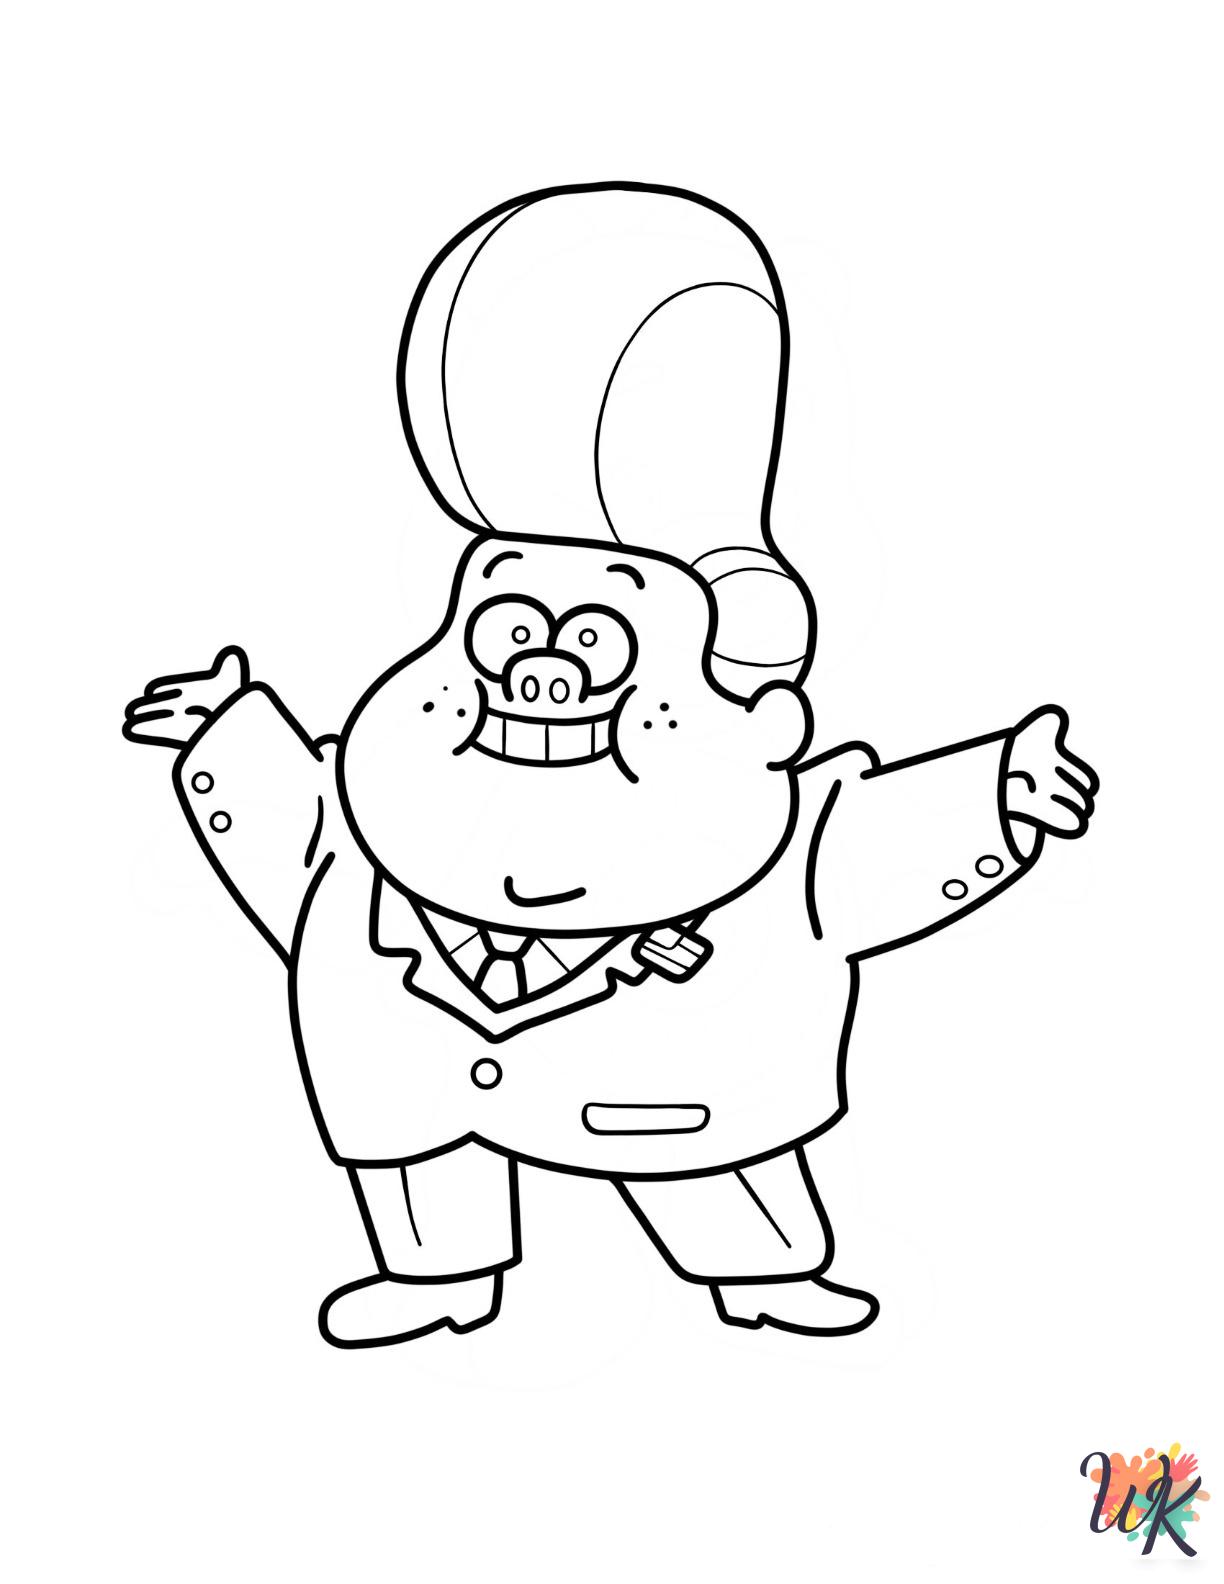 Gravity Falls coloring pages printable